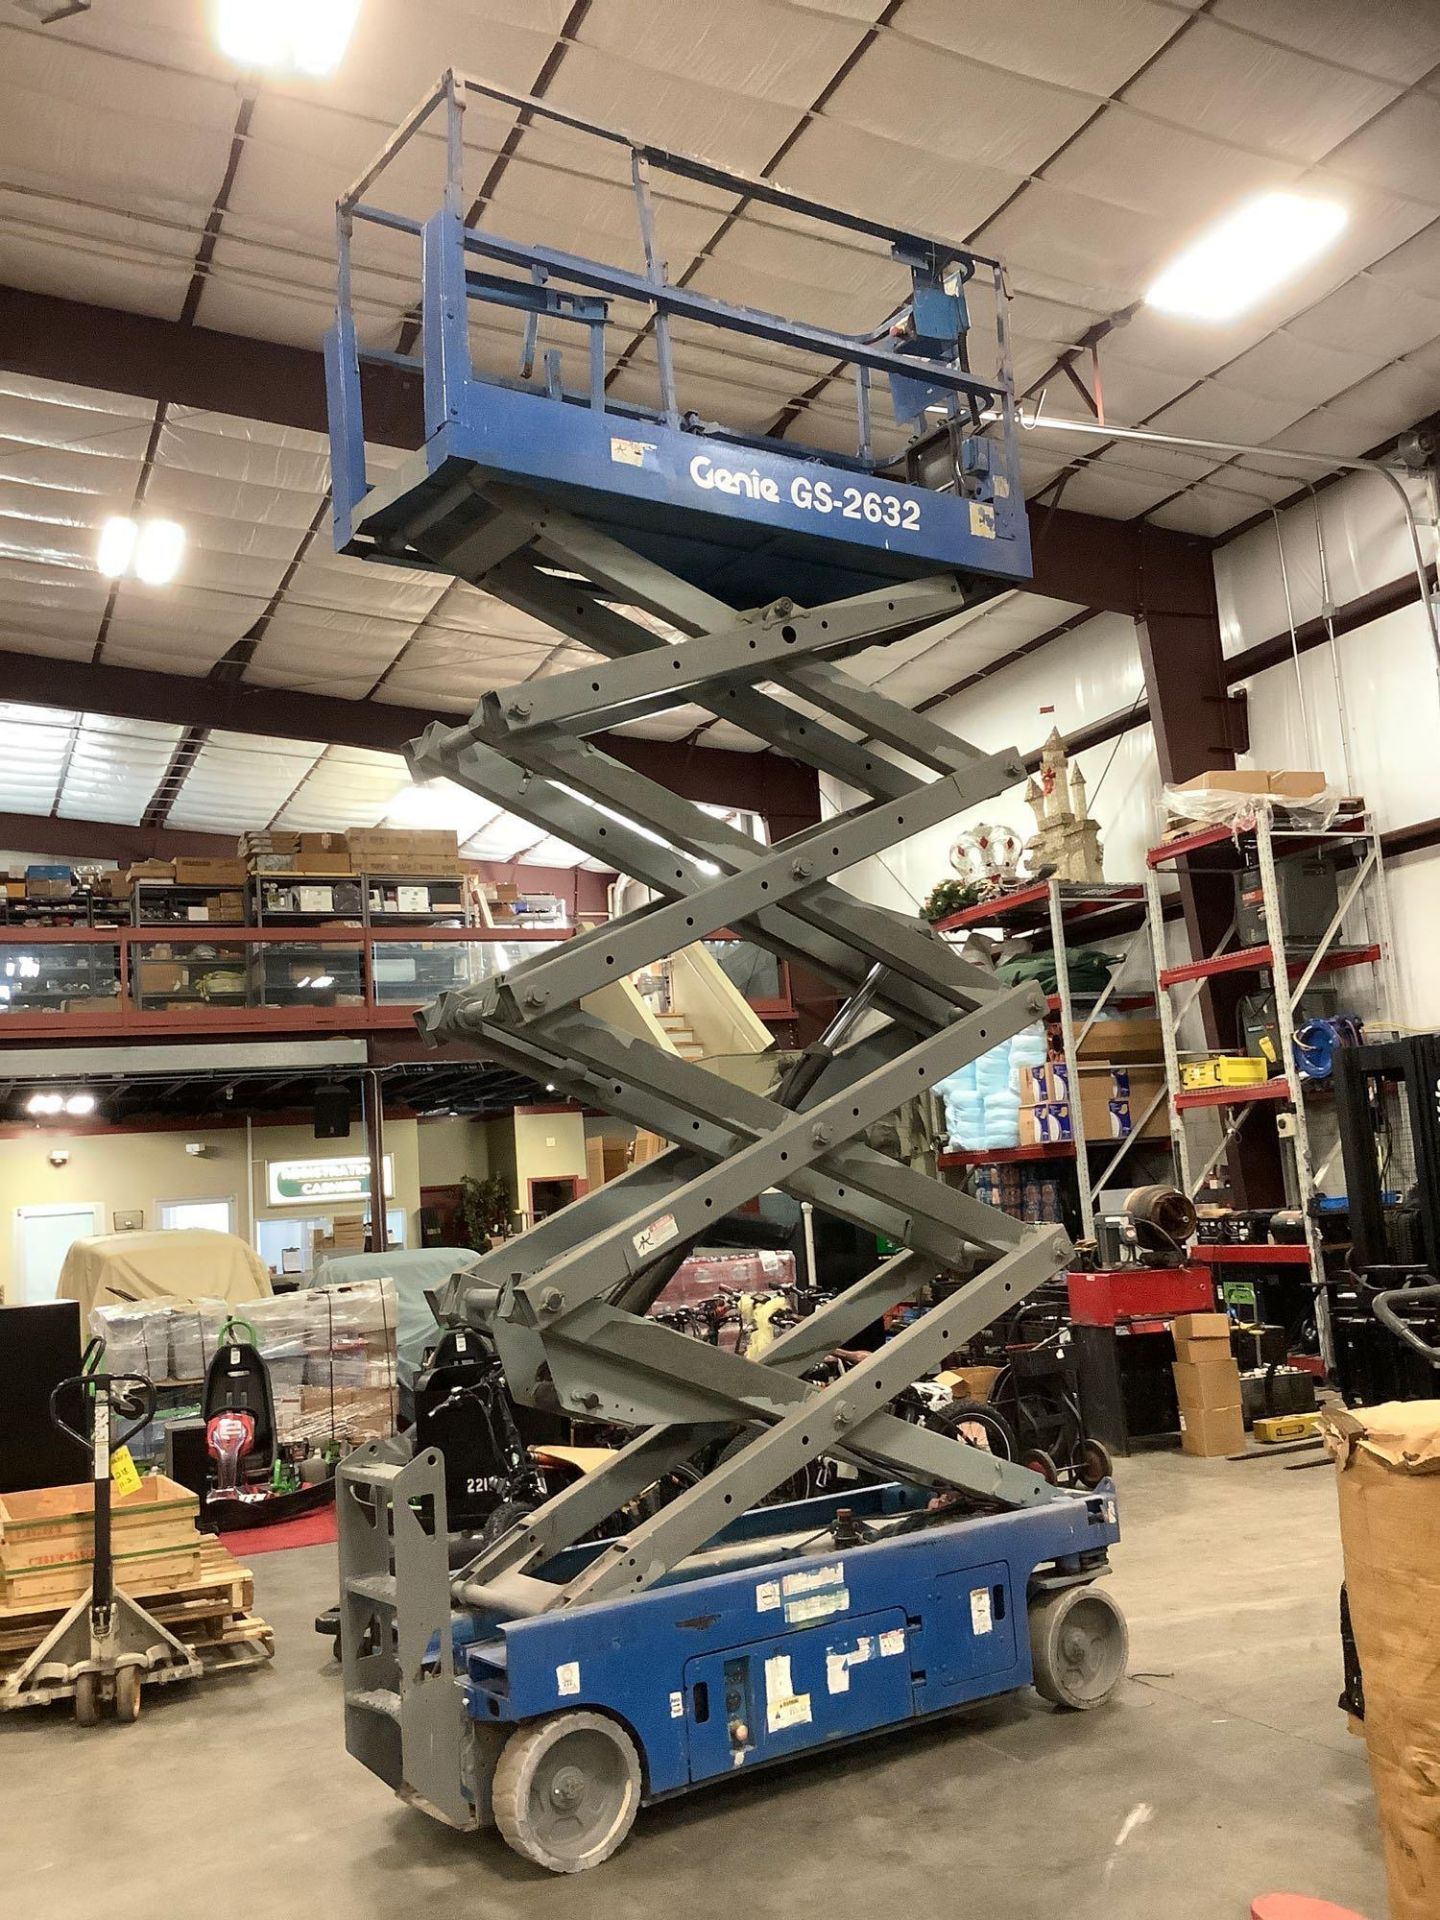 GENIE SCISSOR LIFT MODEL GS-2632, ELECTRIC, APPROX MAX PLATFORM HEIGHT 26FT, NON MARKING TIRES, BUIL